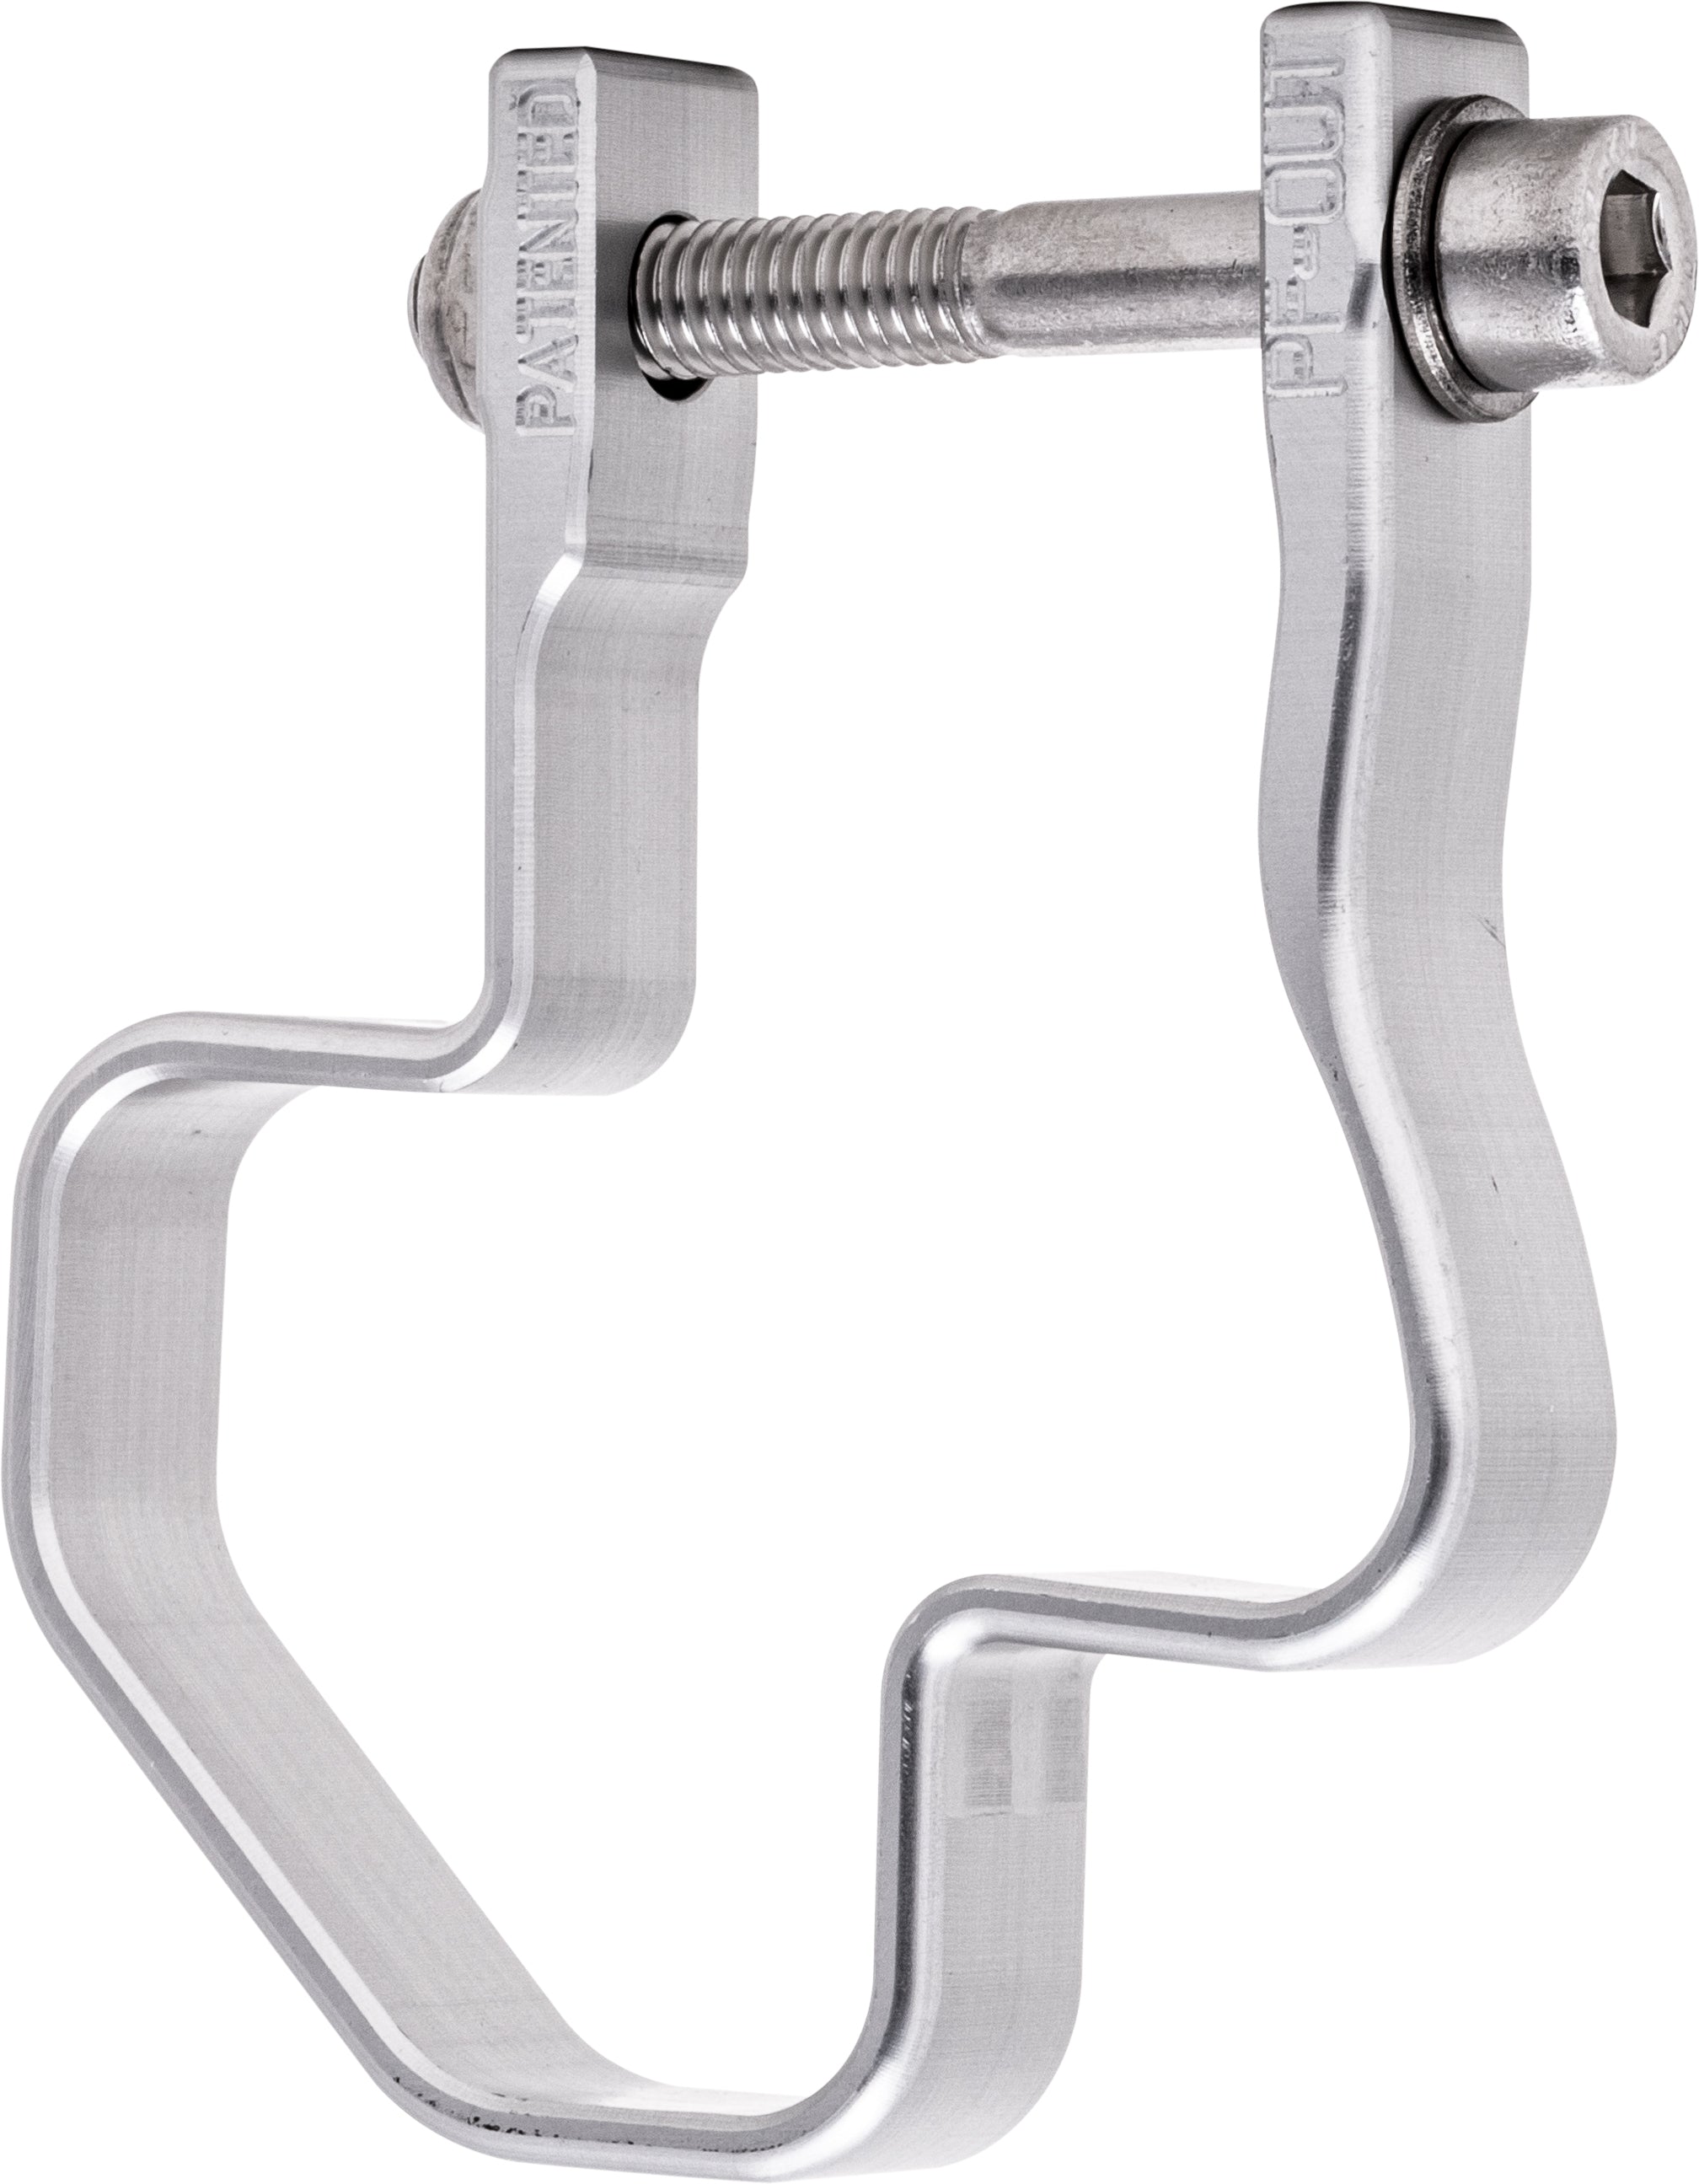 Outward Cage Clamp Silver Pol/Can Am